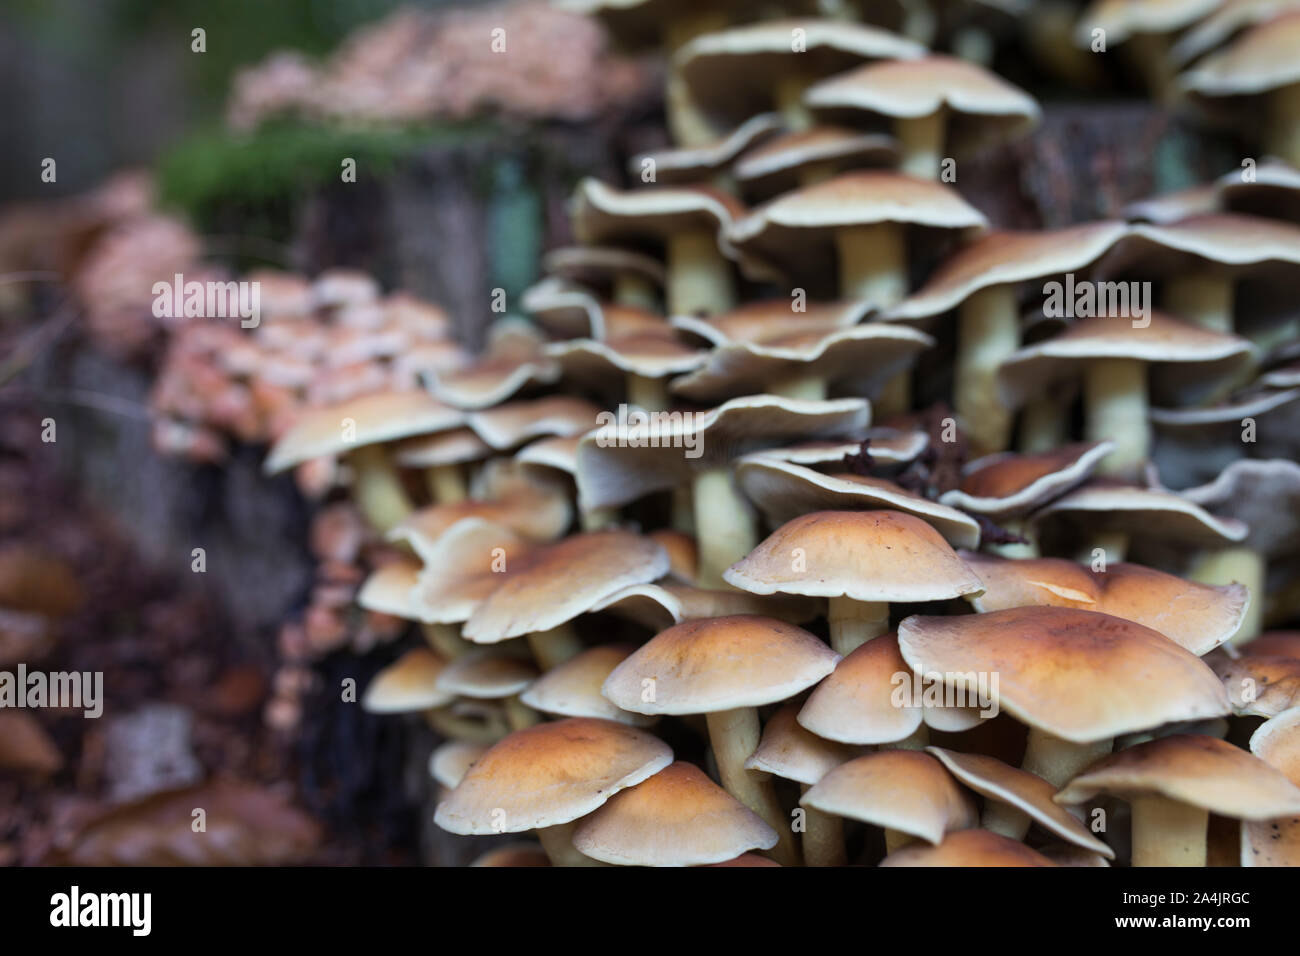 Poisonous sulphur tuft mushrooms growing on a rotting tree stump in the Netherlands Stock Photo